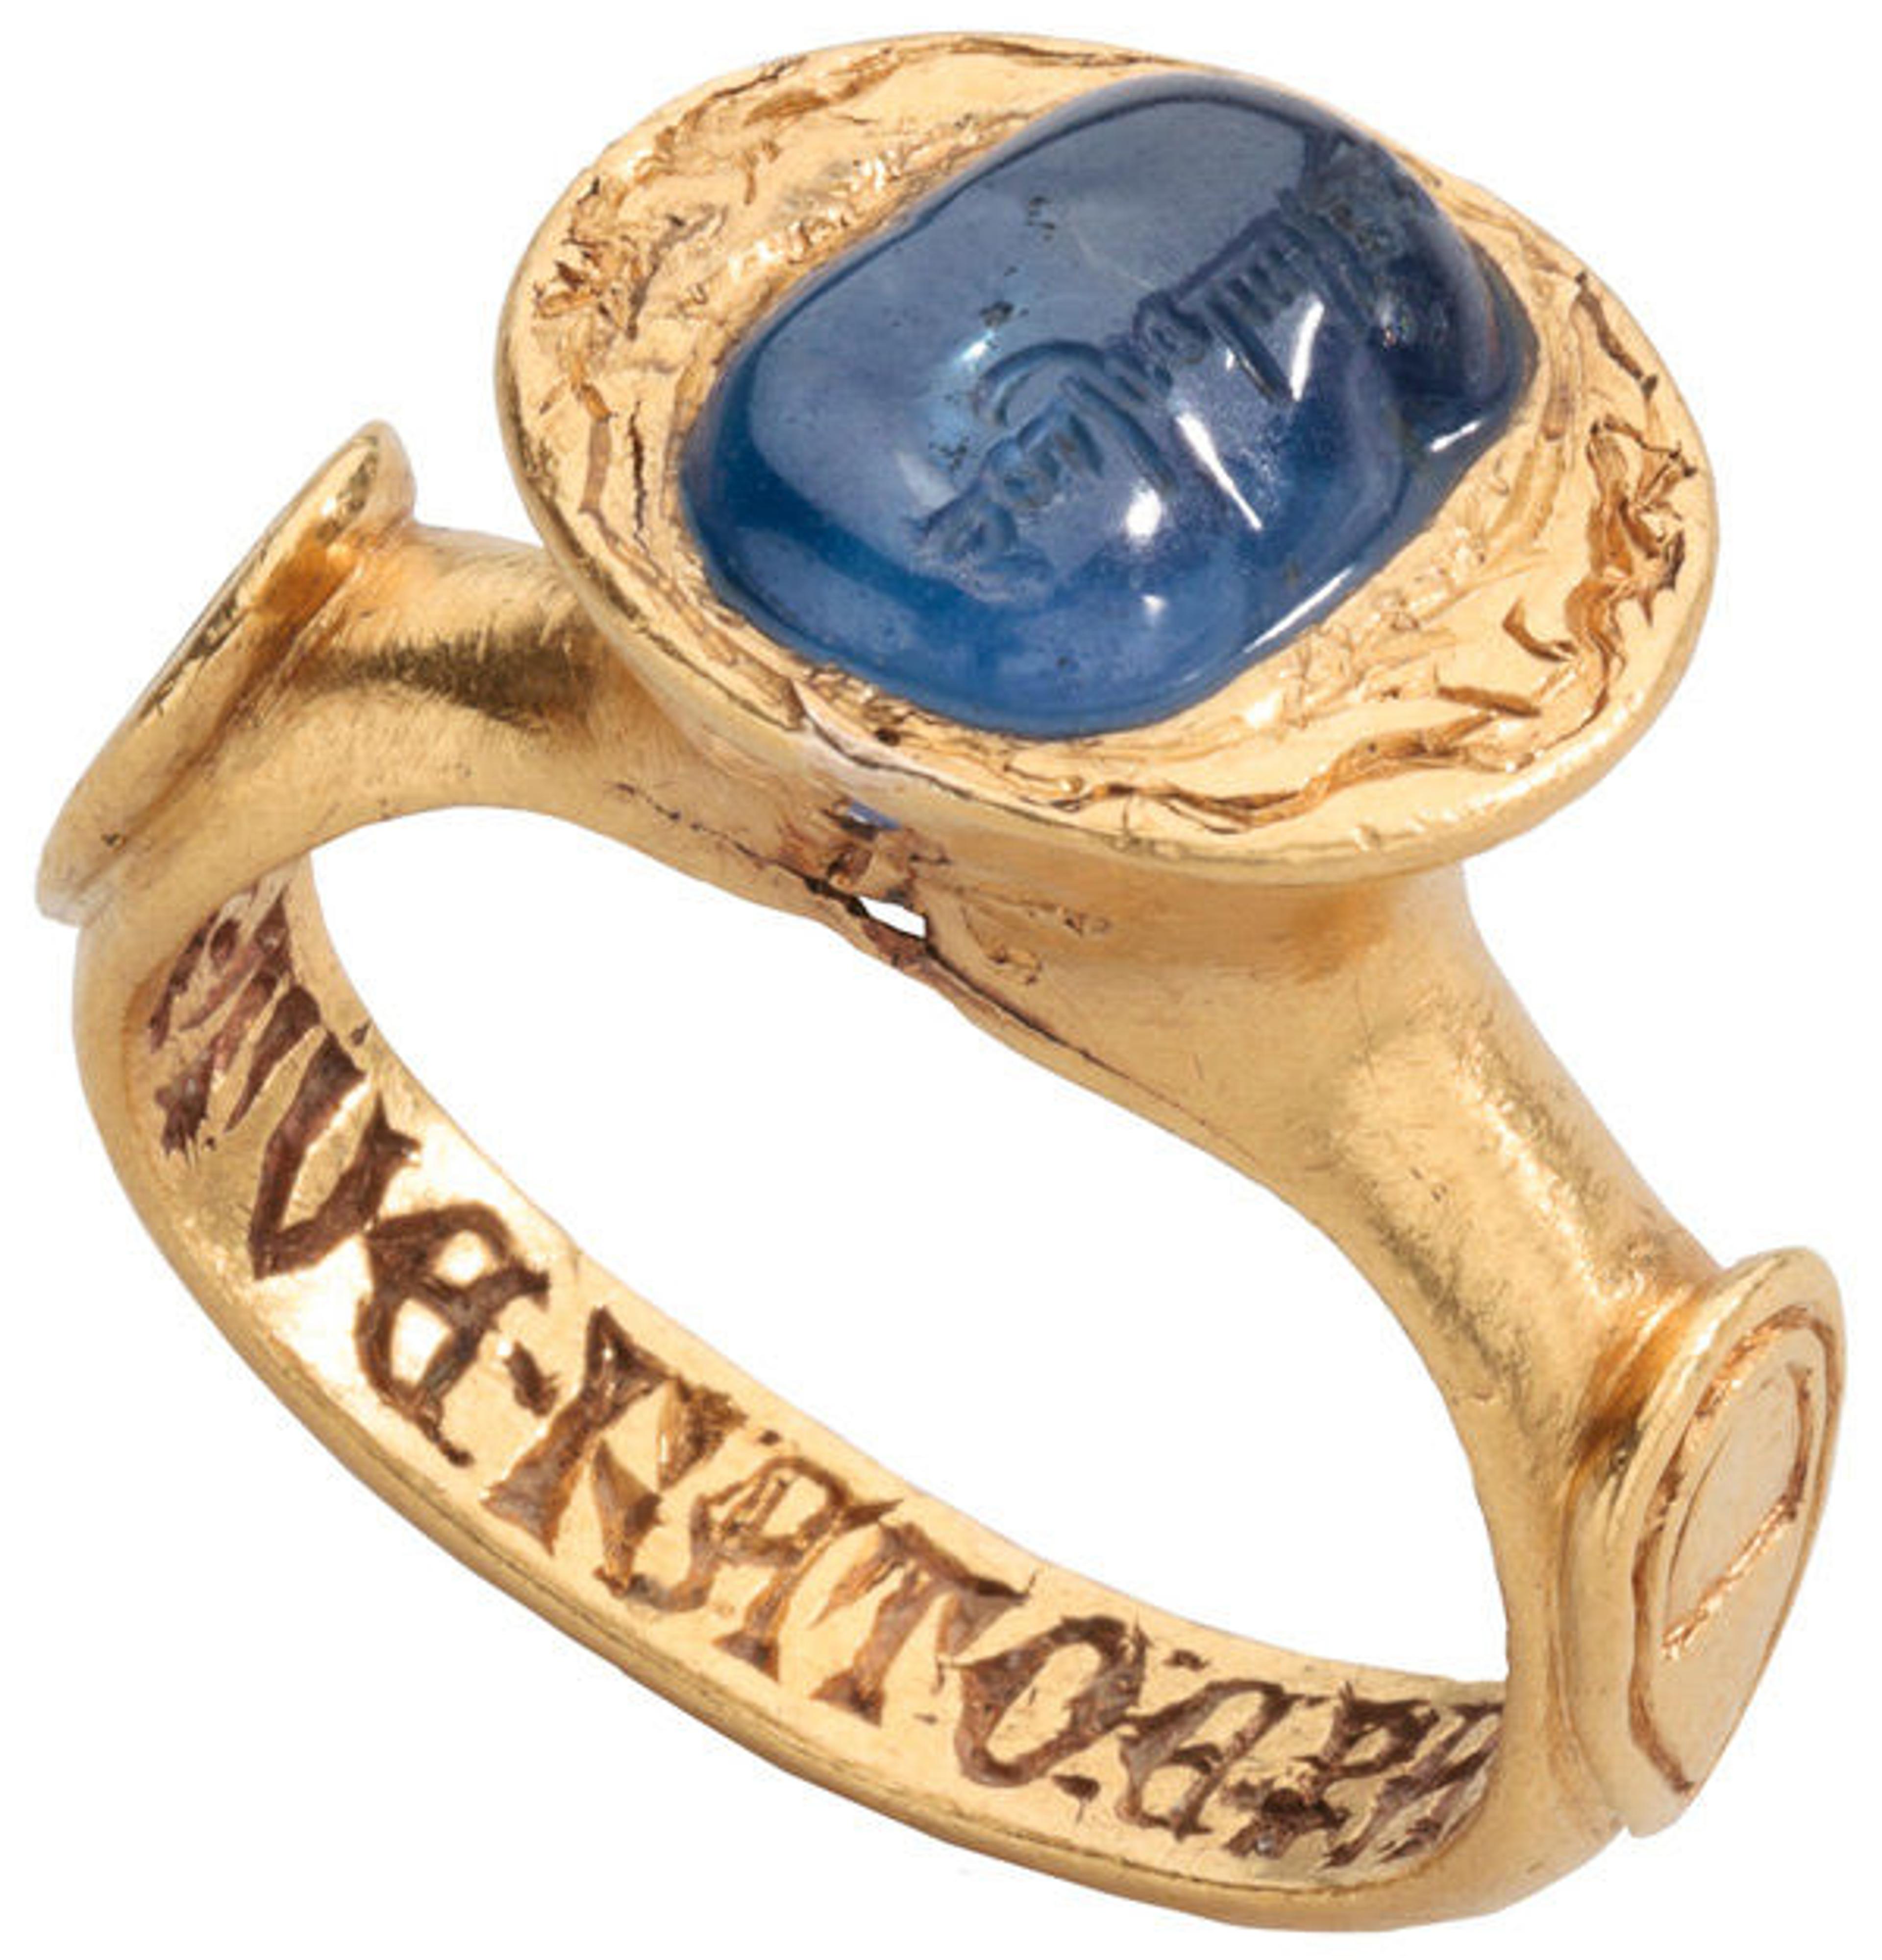 Inscribed Sapphire Ring, late 14th century (setting); 10th century? (sapphire). Italian. Gold, sapphire; Height 30.8 mm; hoop outer diam. 27.89 mm; bezel 16.15 x 17.4 mm; weight 23.5 grams; US size 7.25; UK size O. Griffin Collection